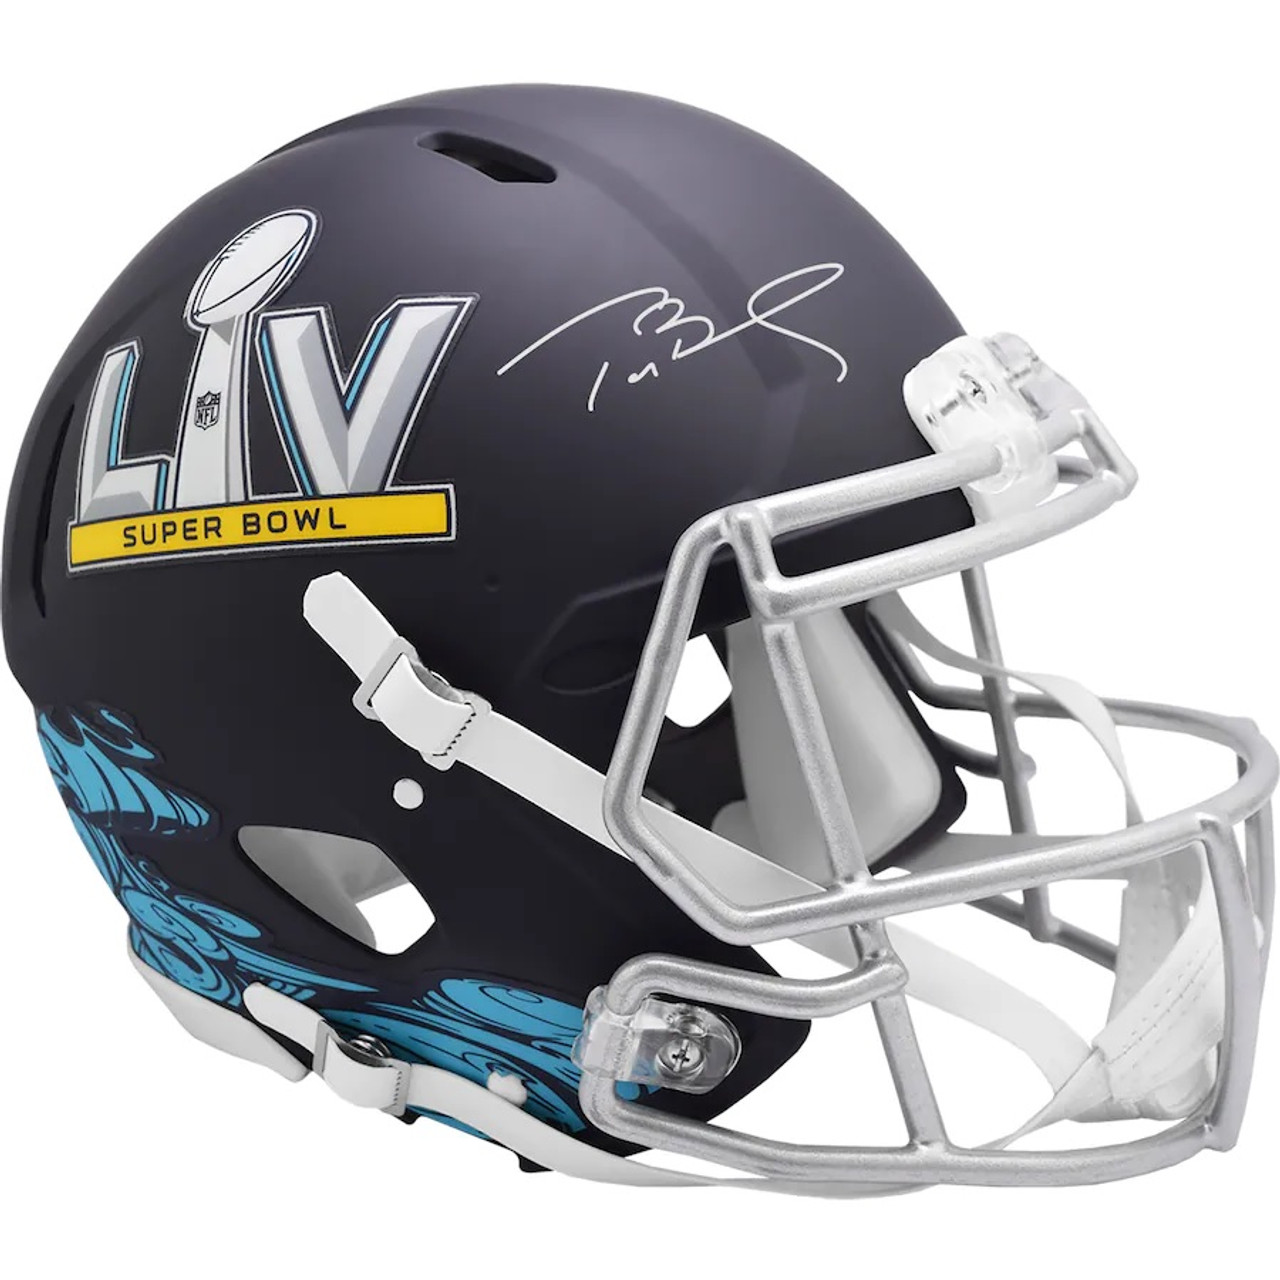 Tom Brady Tampa Bay Buccaneers Autographed Super Bowl LV Pro Football